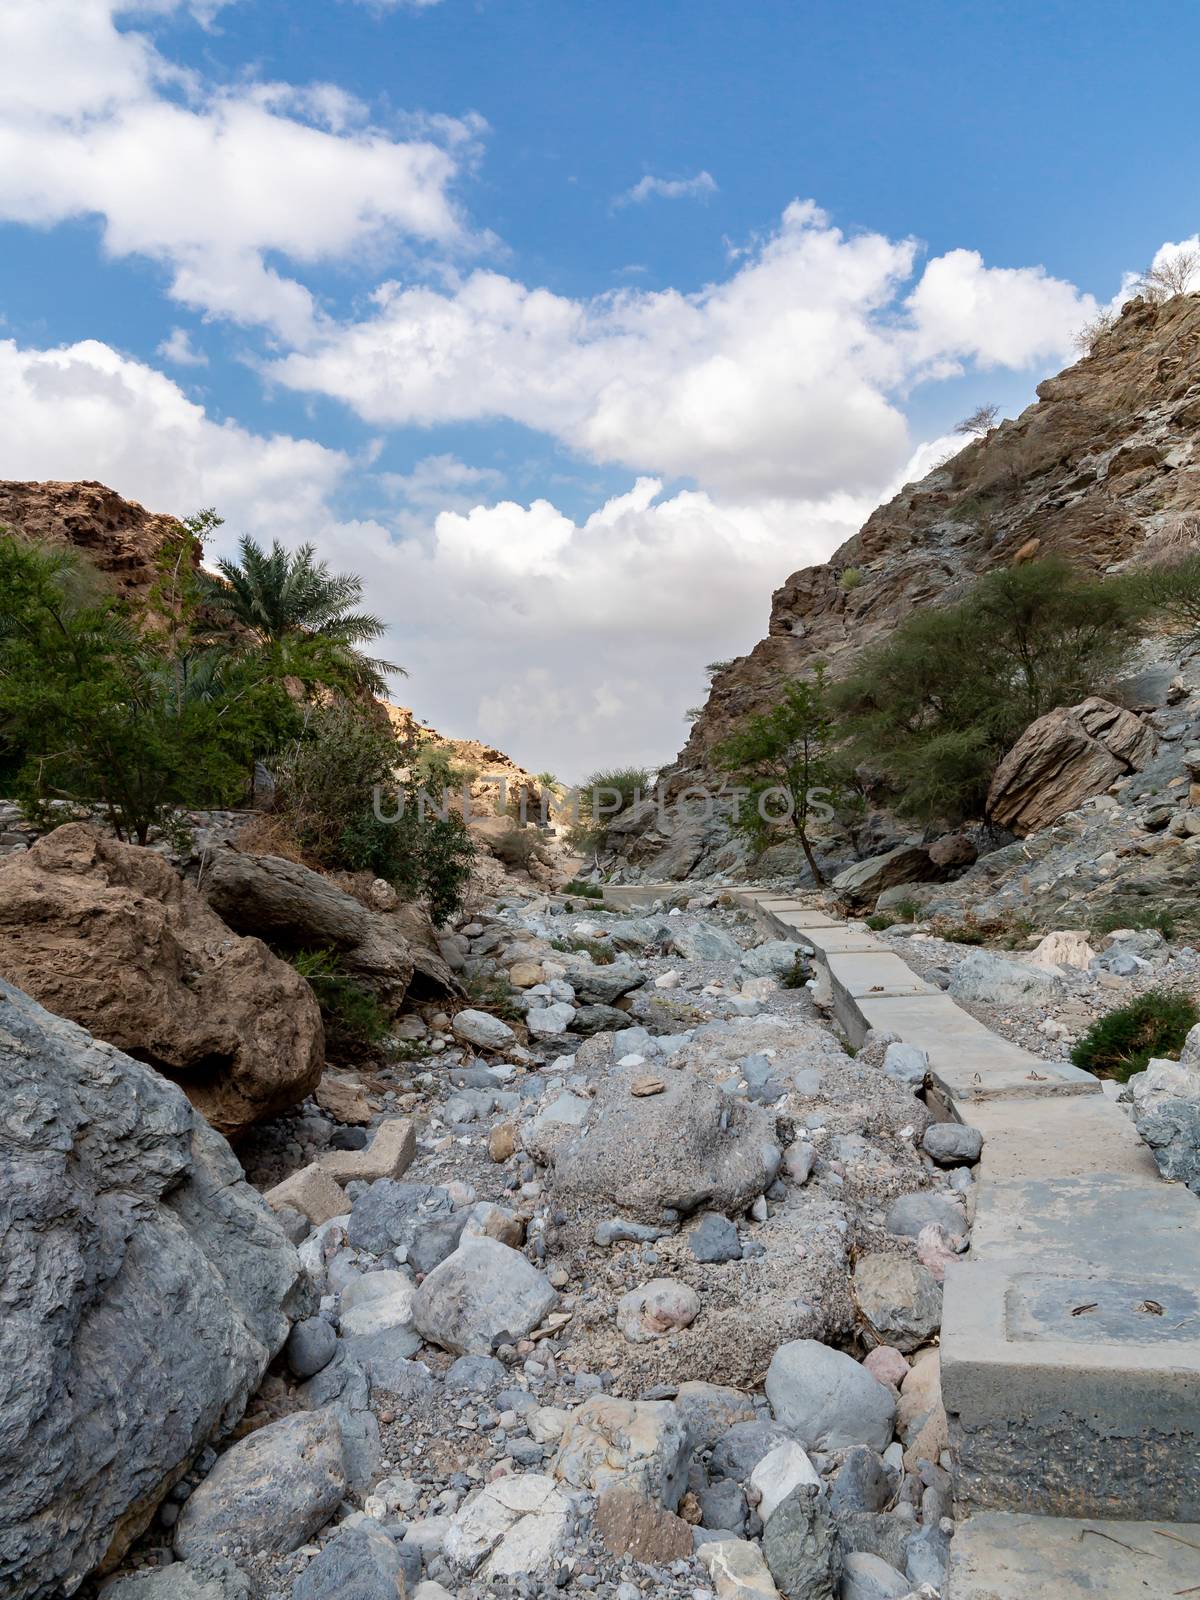 Parched riverbed called wadi in Asia, in the outskirts of Muscat, Oman.